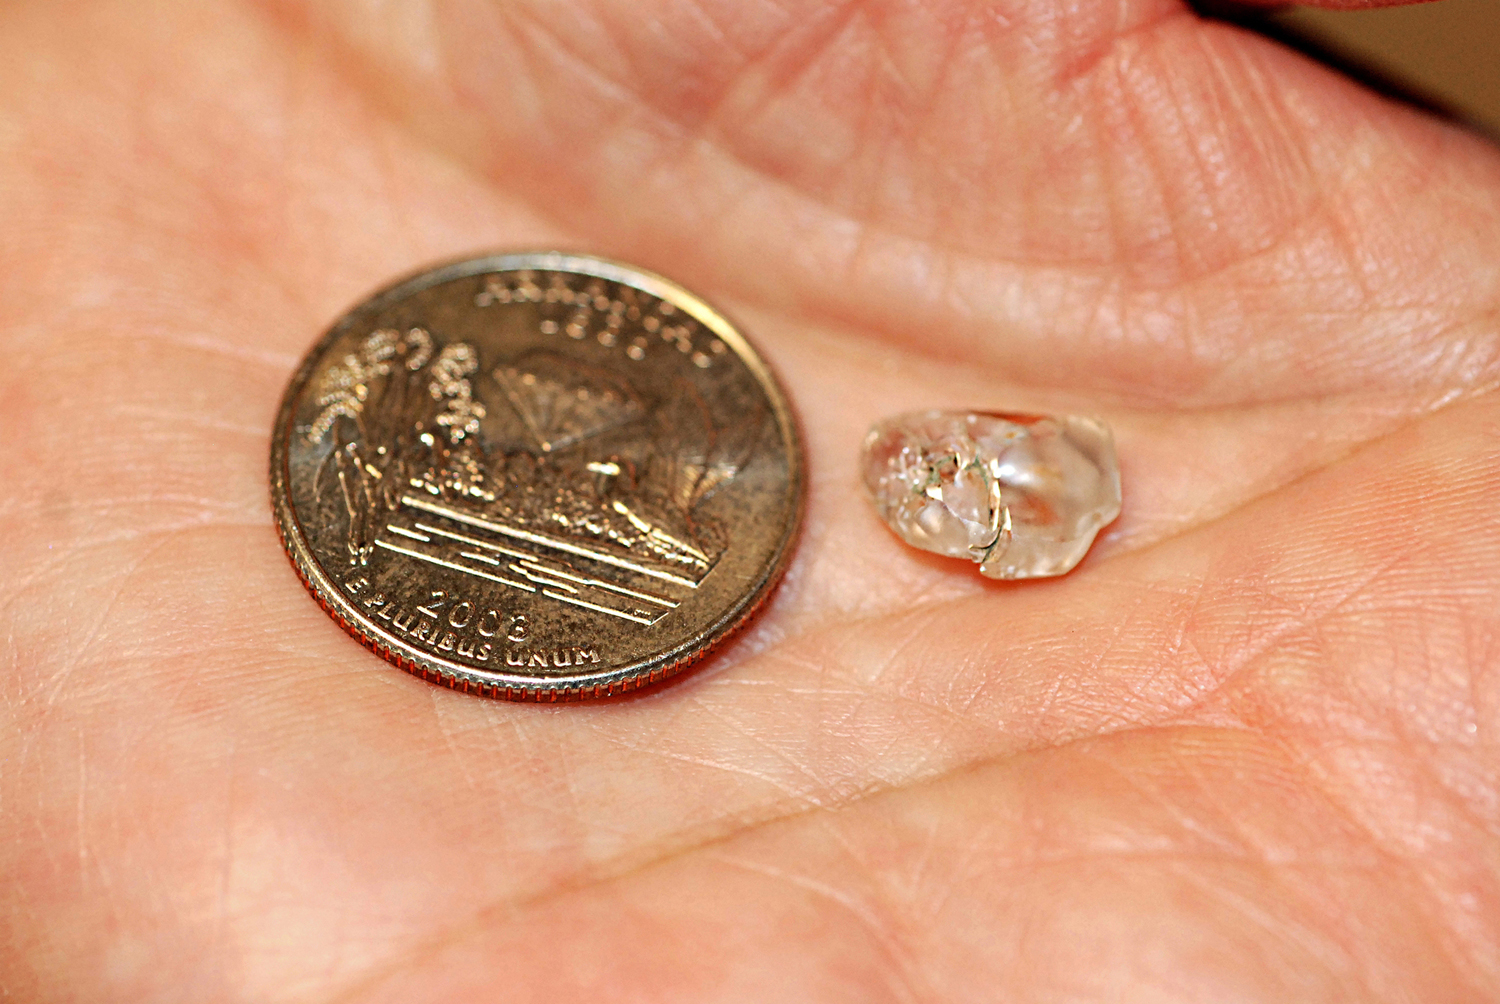 PHOTO: Susie Clark said a prayer when she visited Crater of Diamonds State Park in Arkansas and those prayers were answered when she found a 3.69-carat diamond.